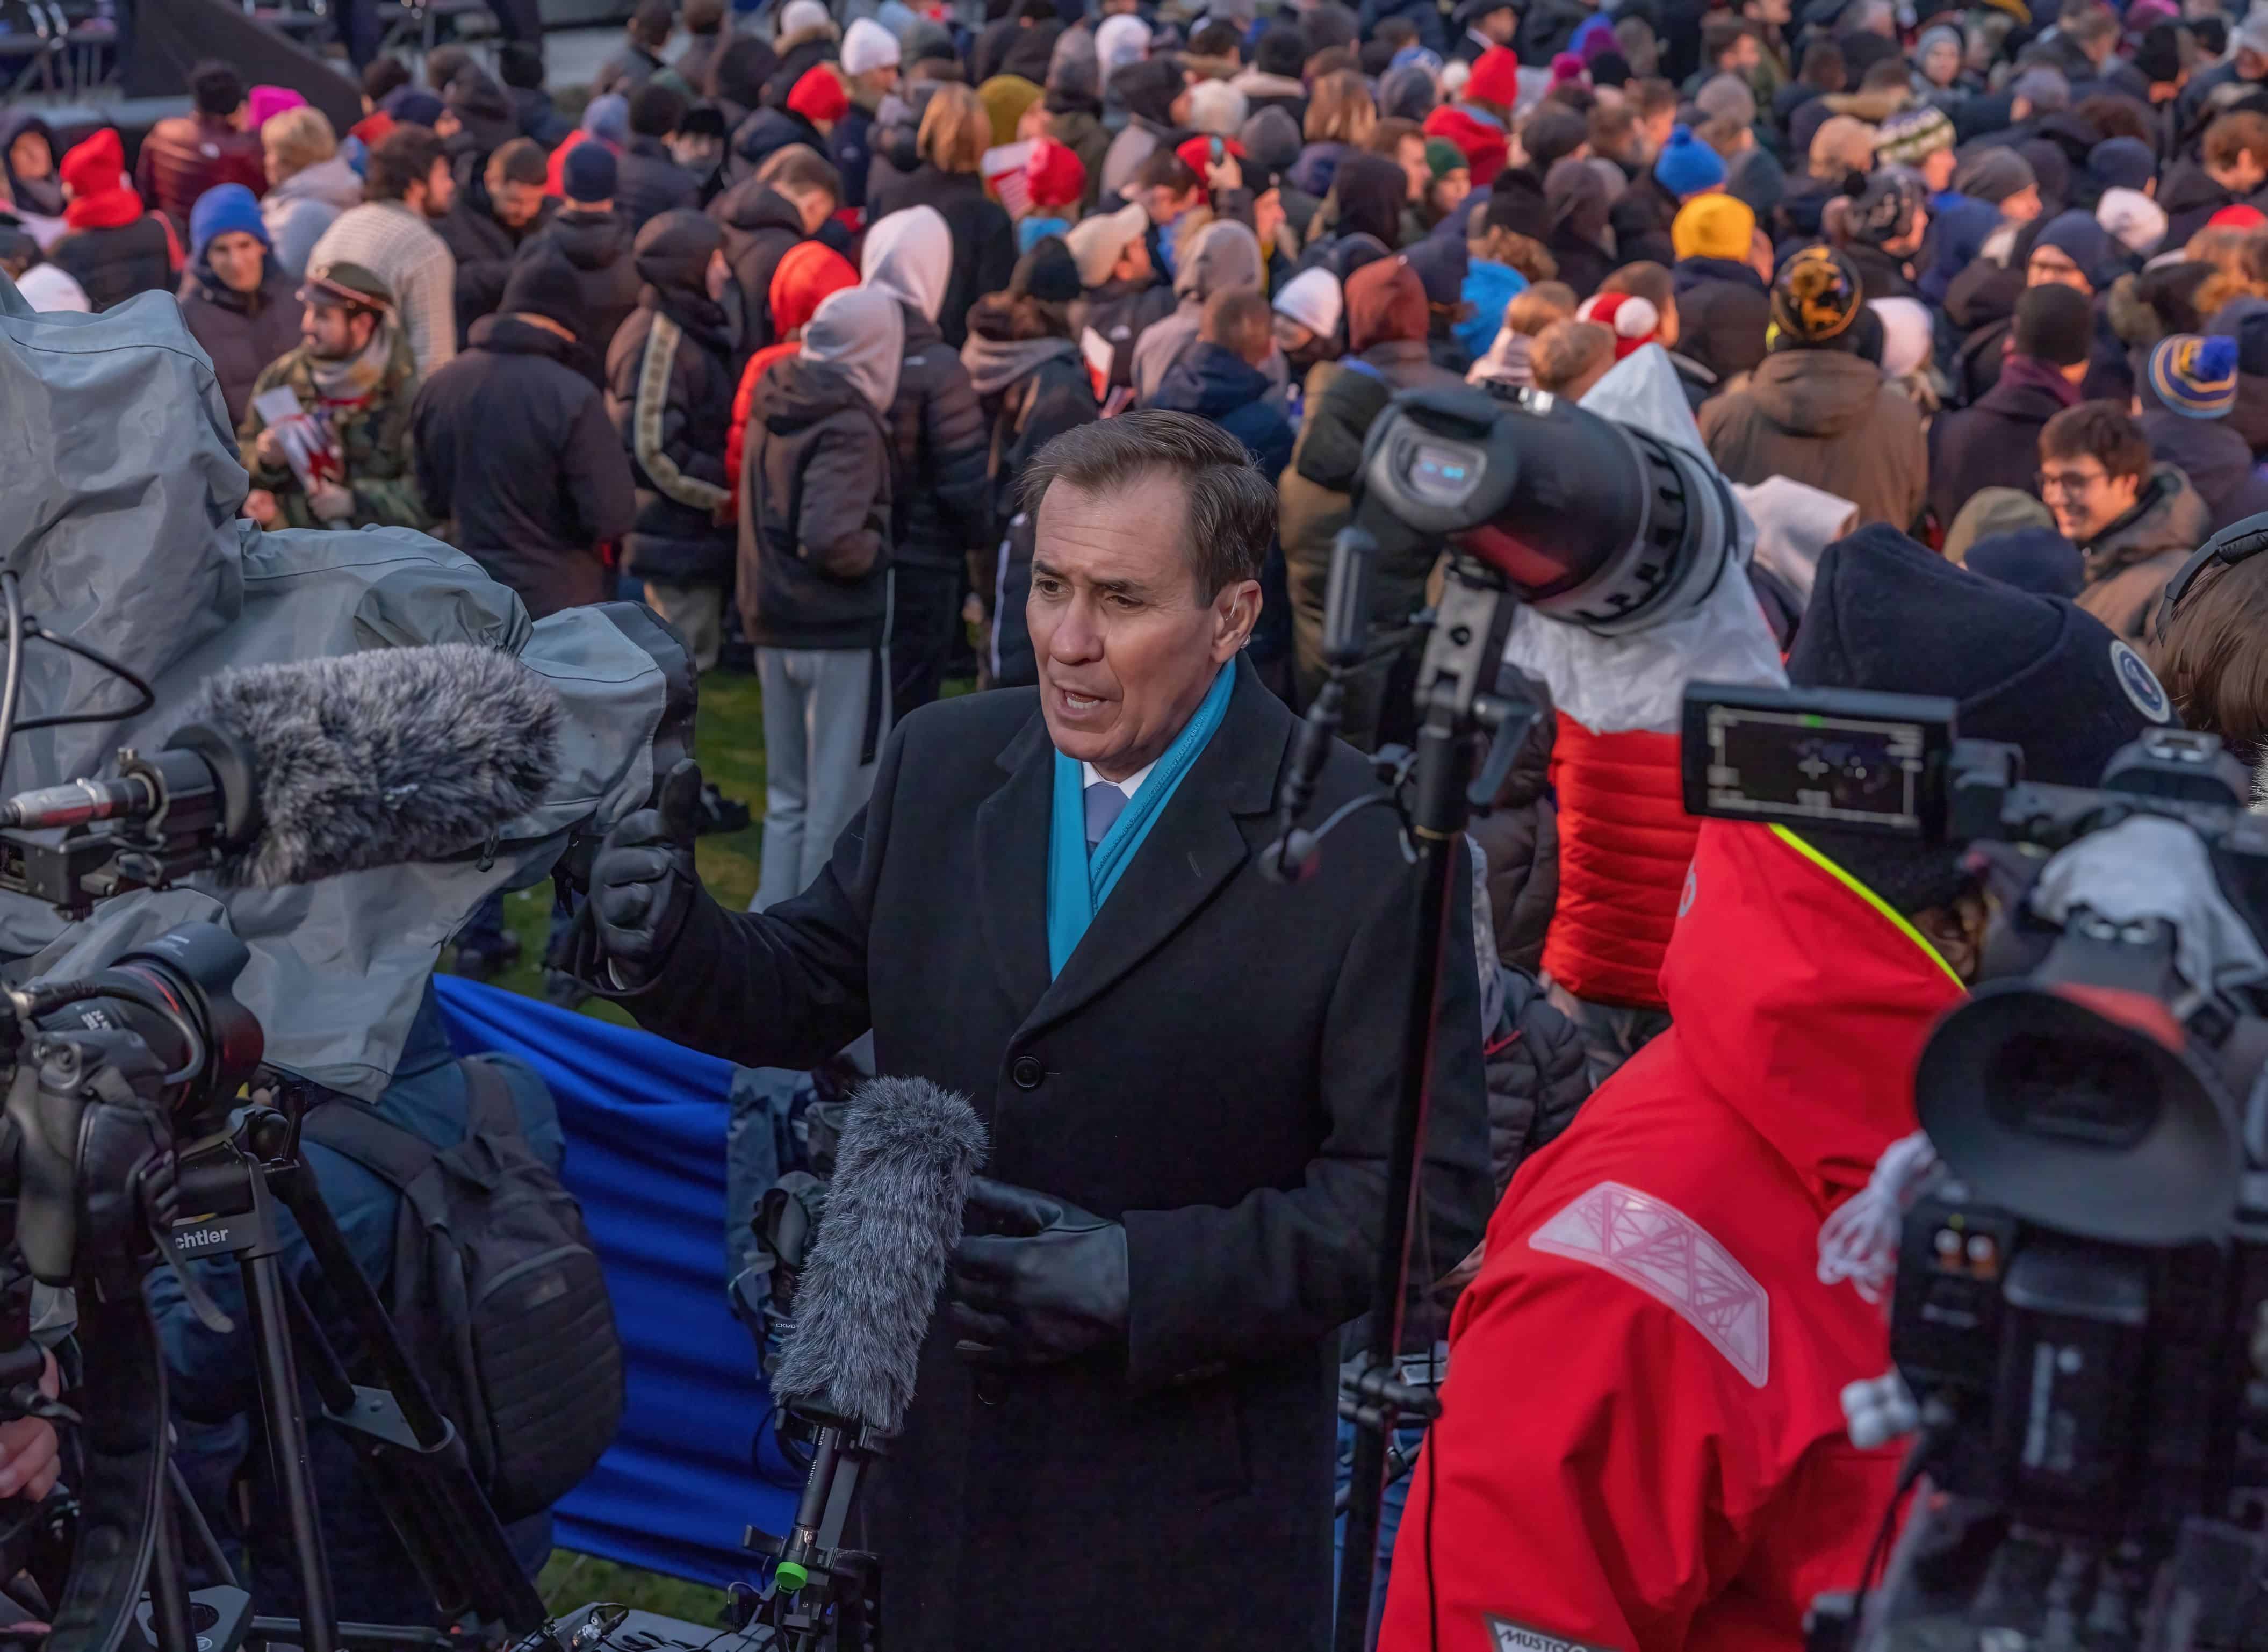 WARSAW, POLAND – February 21, 2023: United States National Security Council Coordinator for Strategic Communications John Kirby gives a television interview at the Royal Castle in Warsaw.